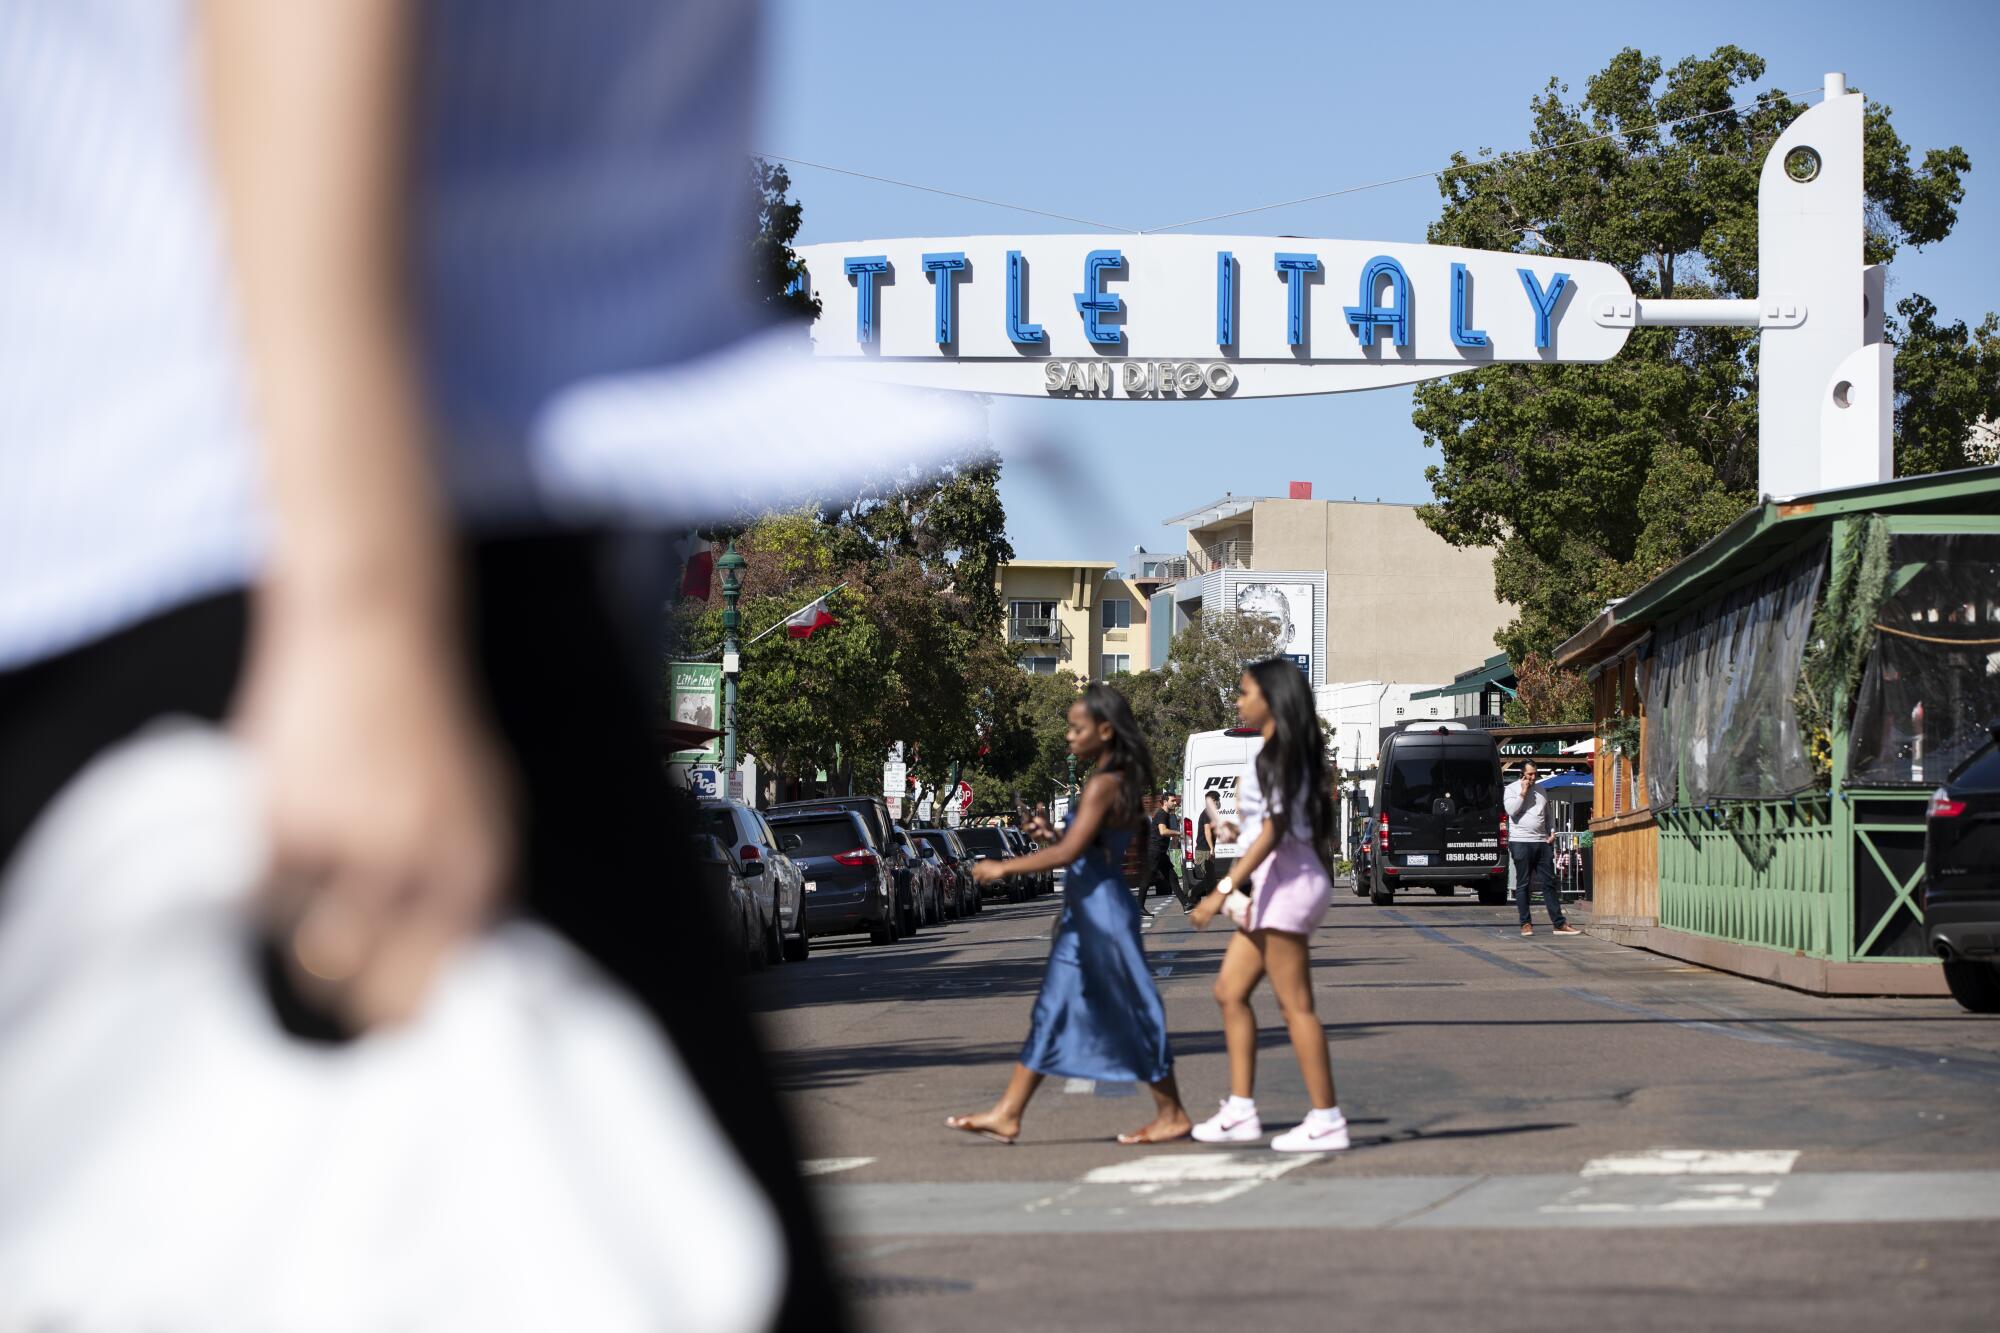 People stroll in Little Italy on Tuesday, Oct. 19, 2021 in San Diego, California.